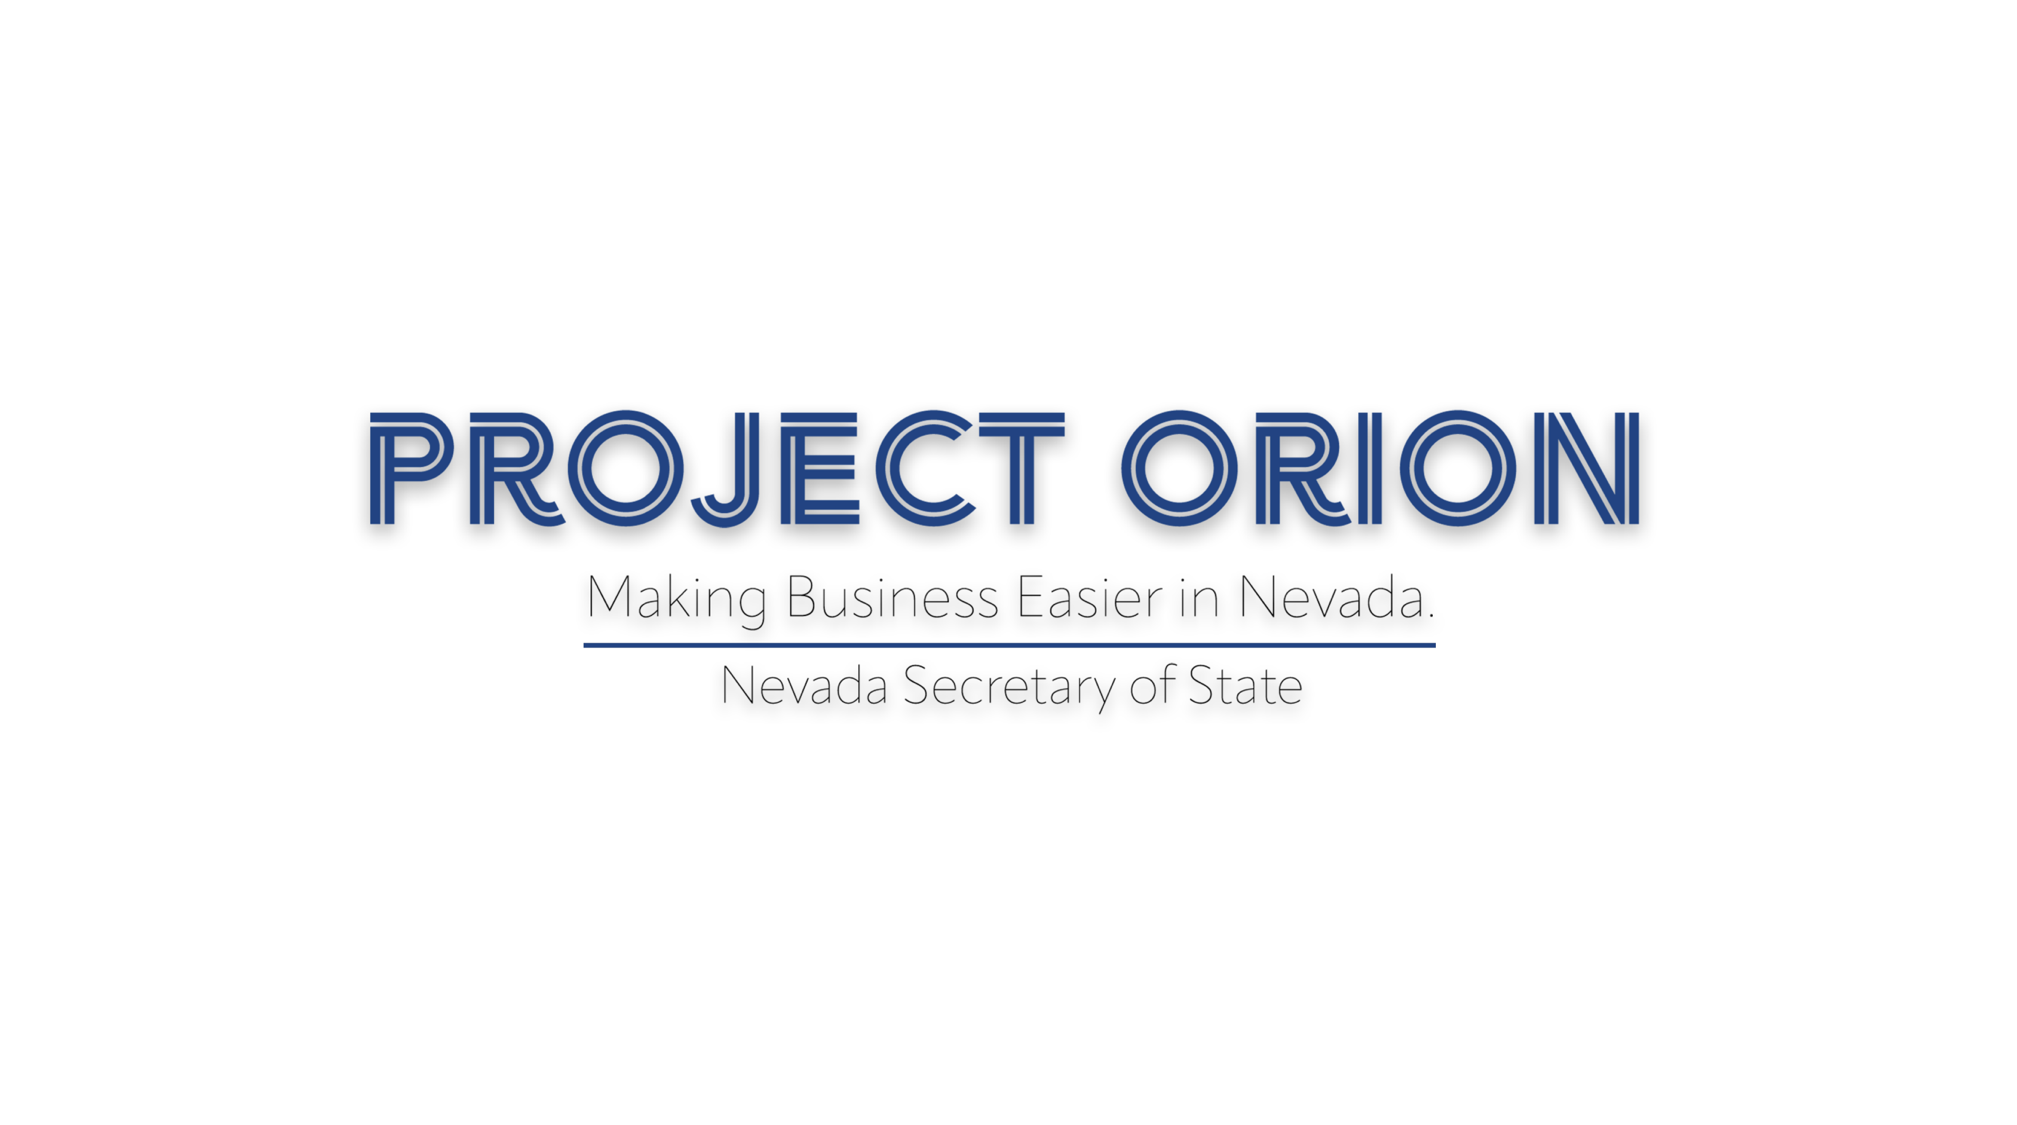 Nevada Secretary of State Francisco Aguilar launches “Project Orion,” Nevada’s business licensing portal overhaul